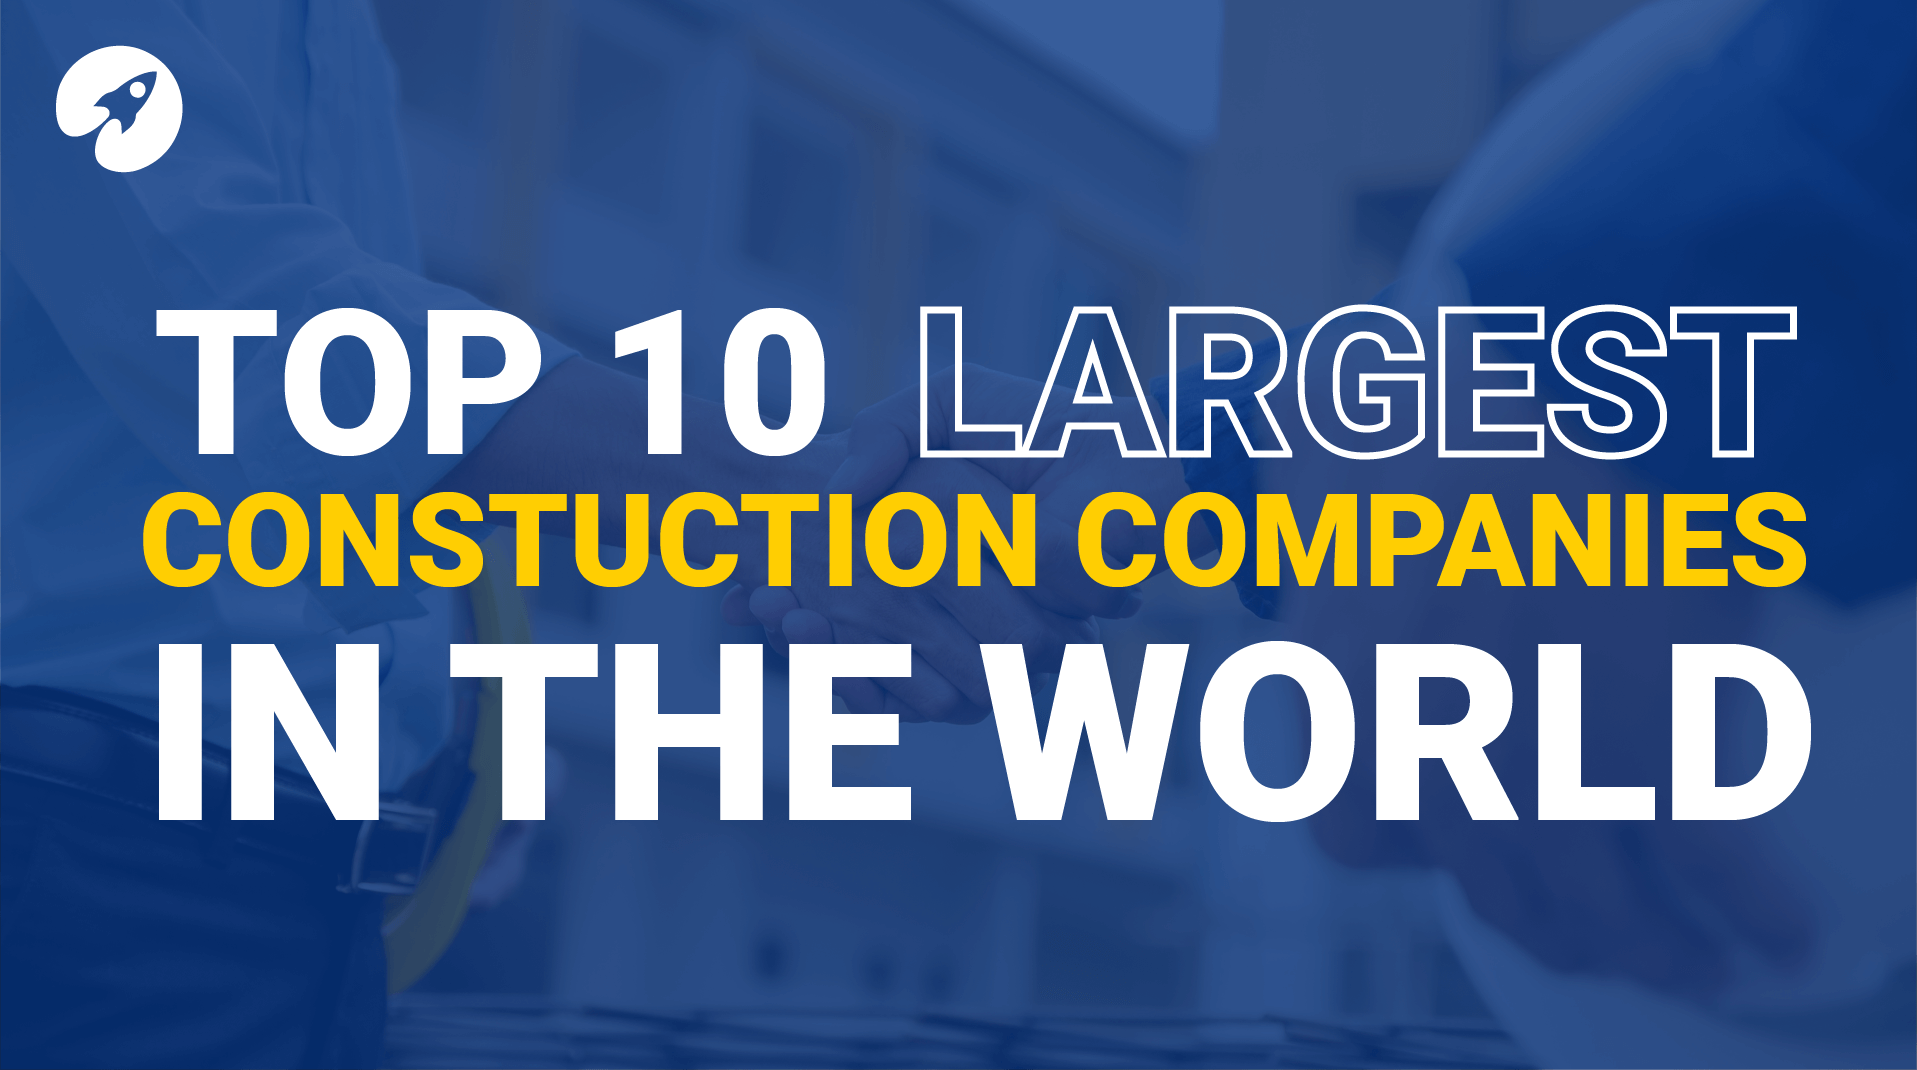 The top largest construction companies in the world